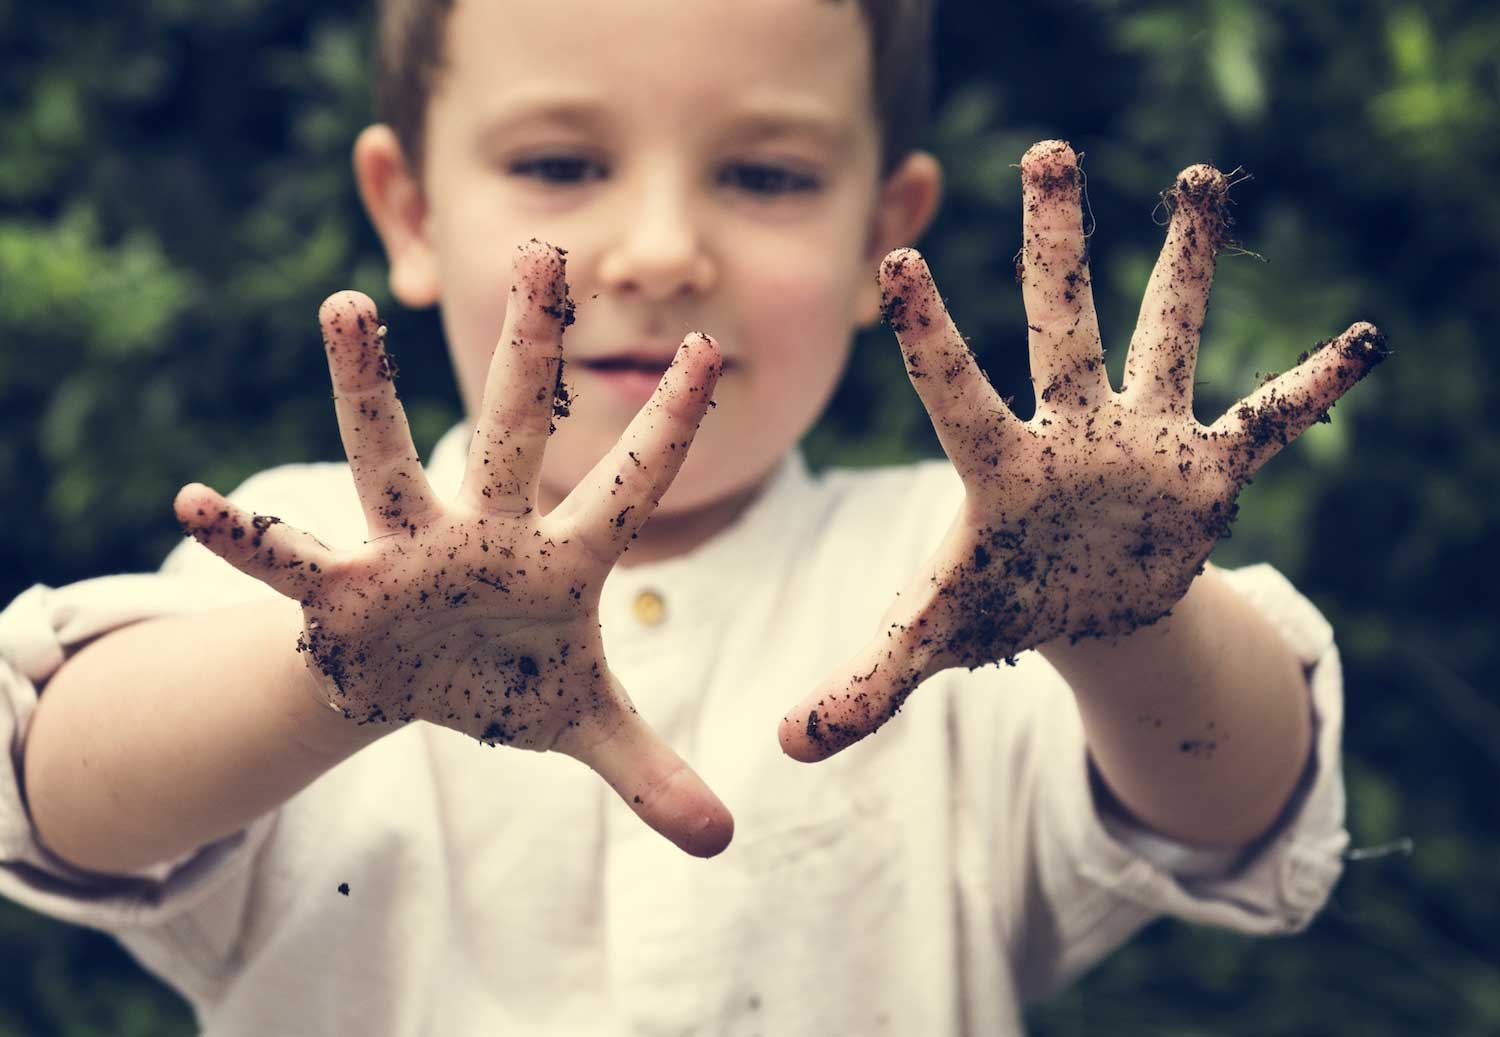 A boy holding out his dirt-covered hands.